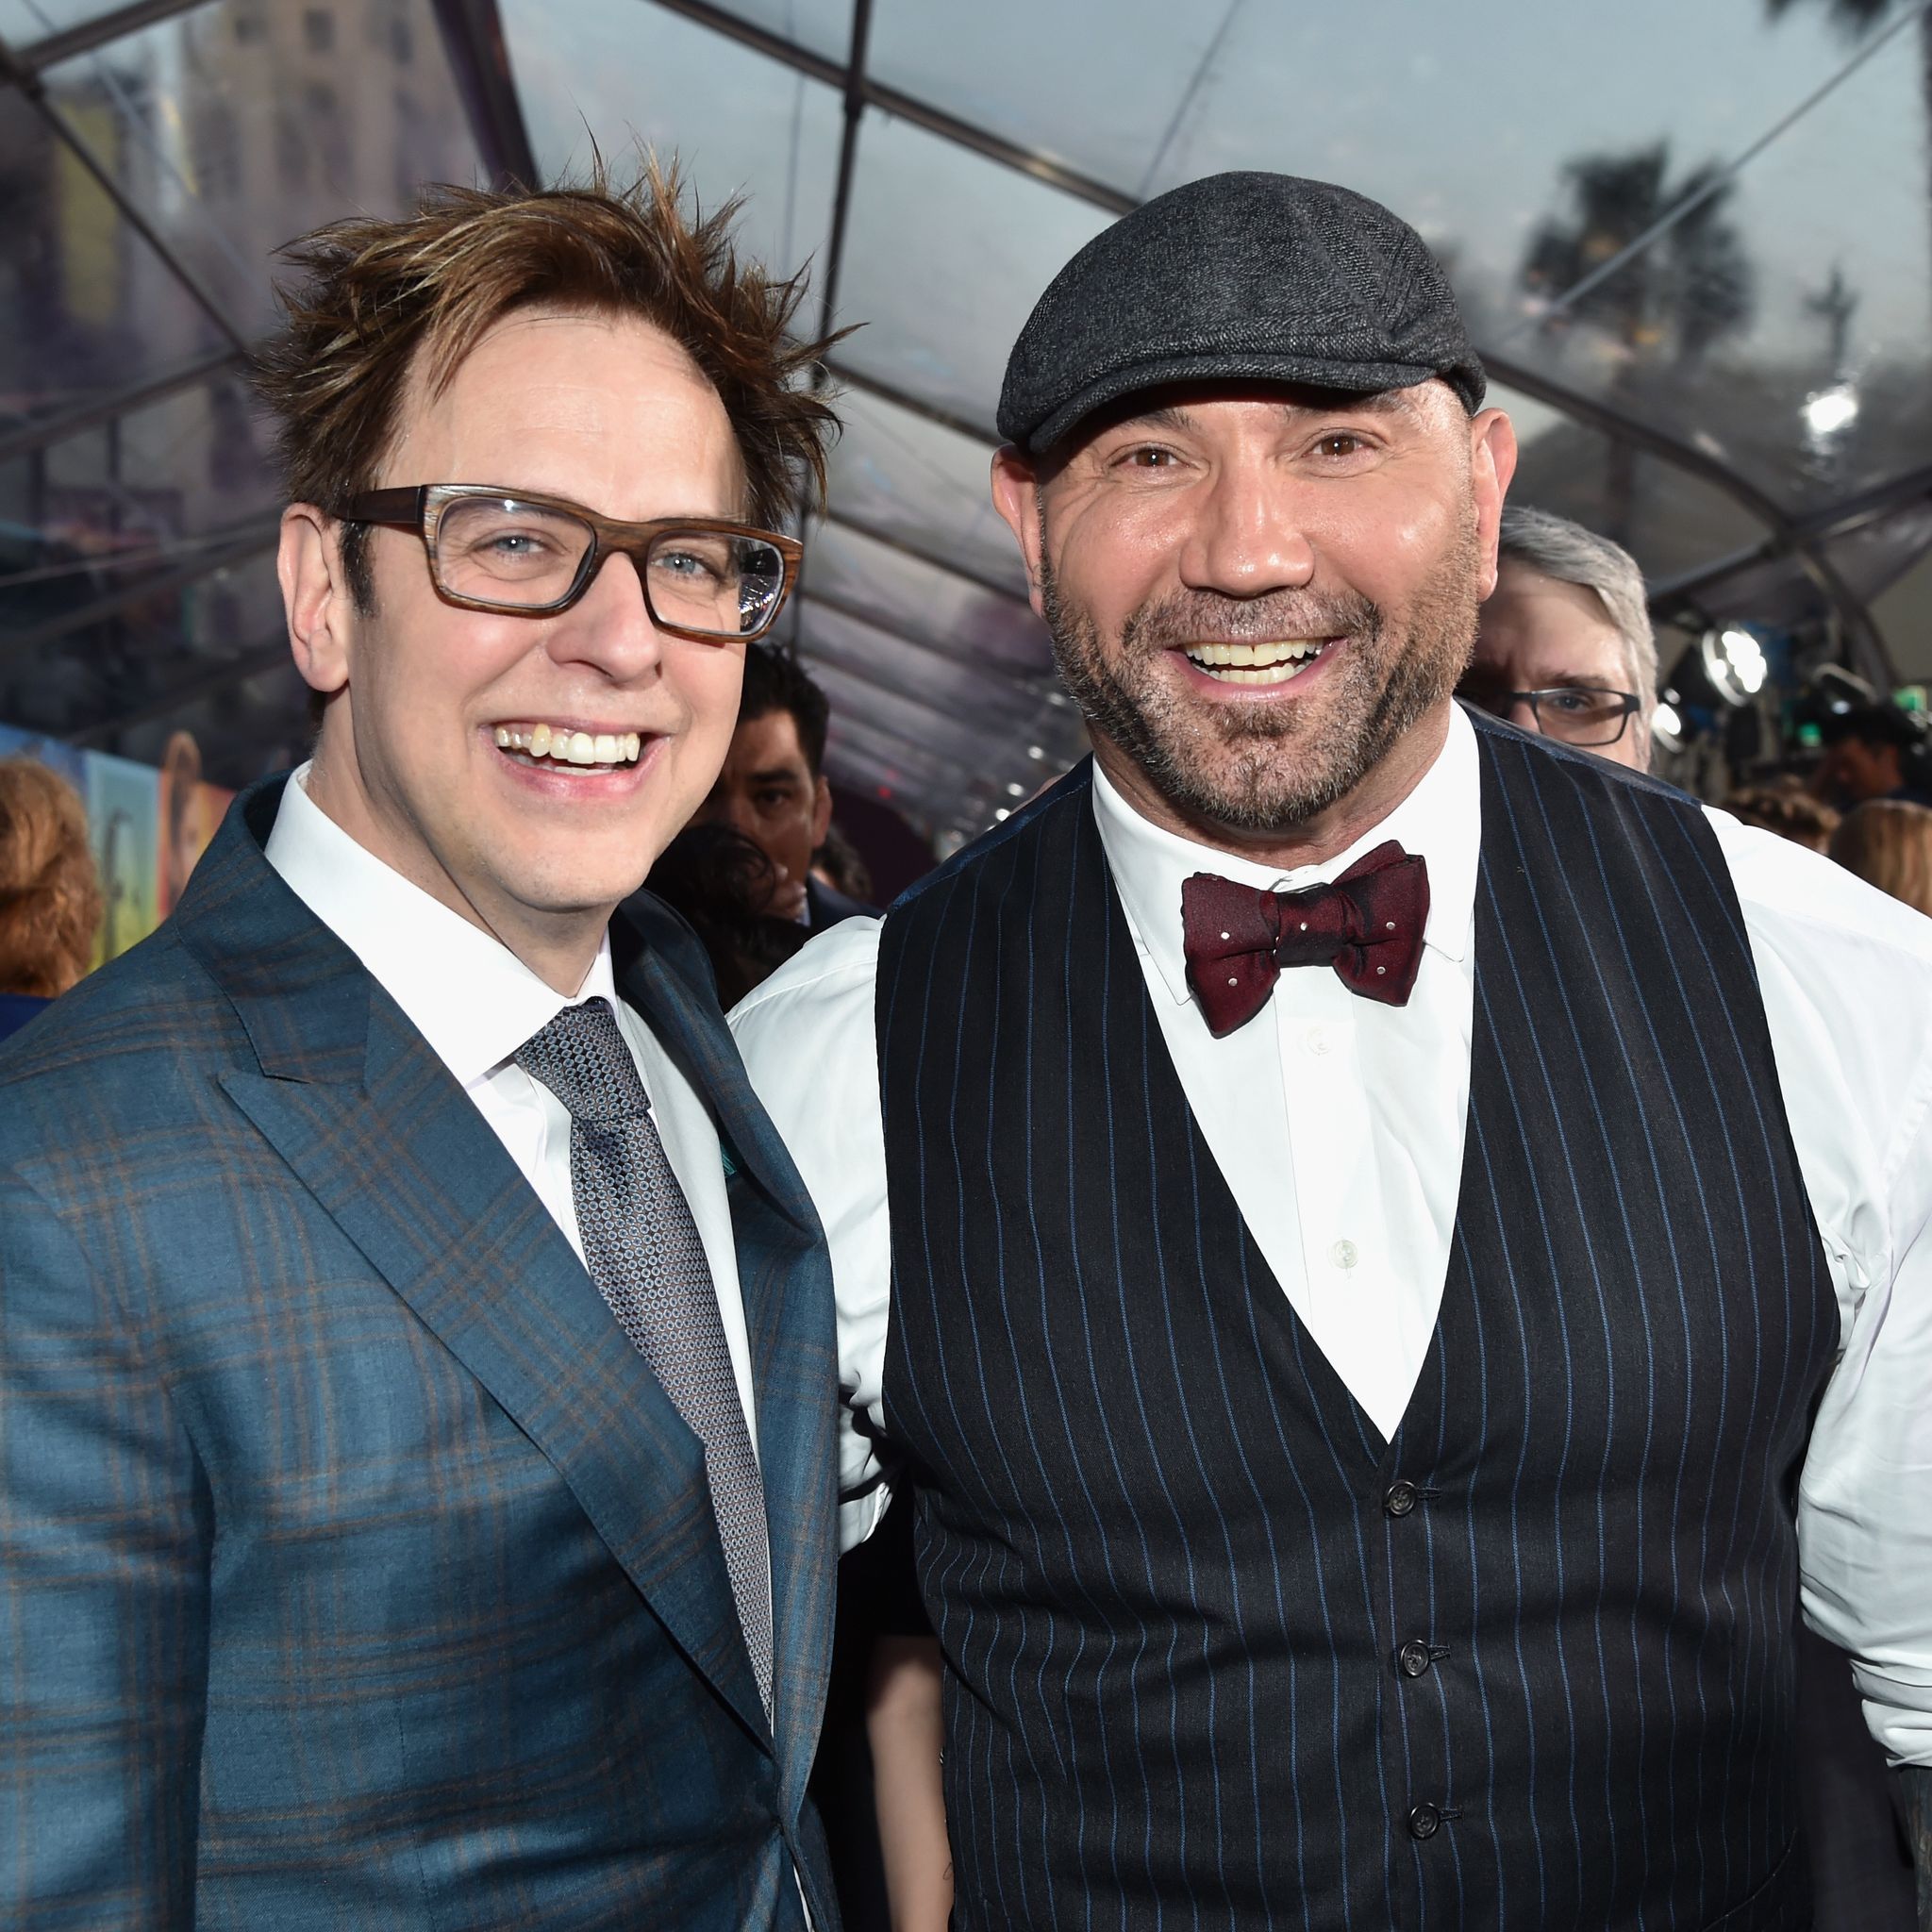 Premiere Of Disney And Marvel's "Guardians Of The Galaxy Vol. 2" - Red Carpet